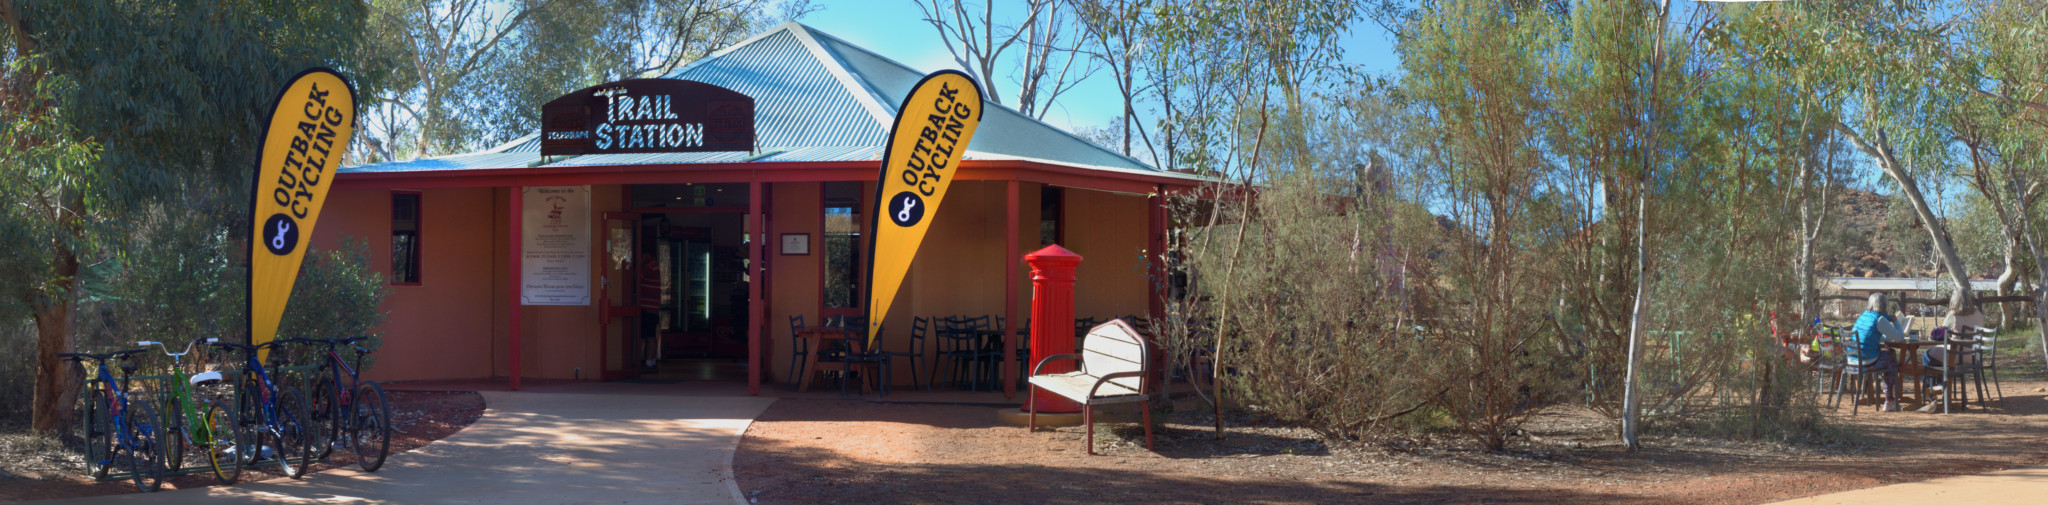 Historic Alice Springs Telegraph Station in the Australian Outback